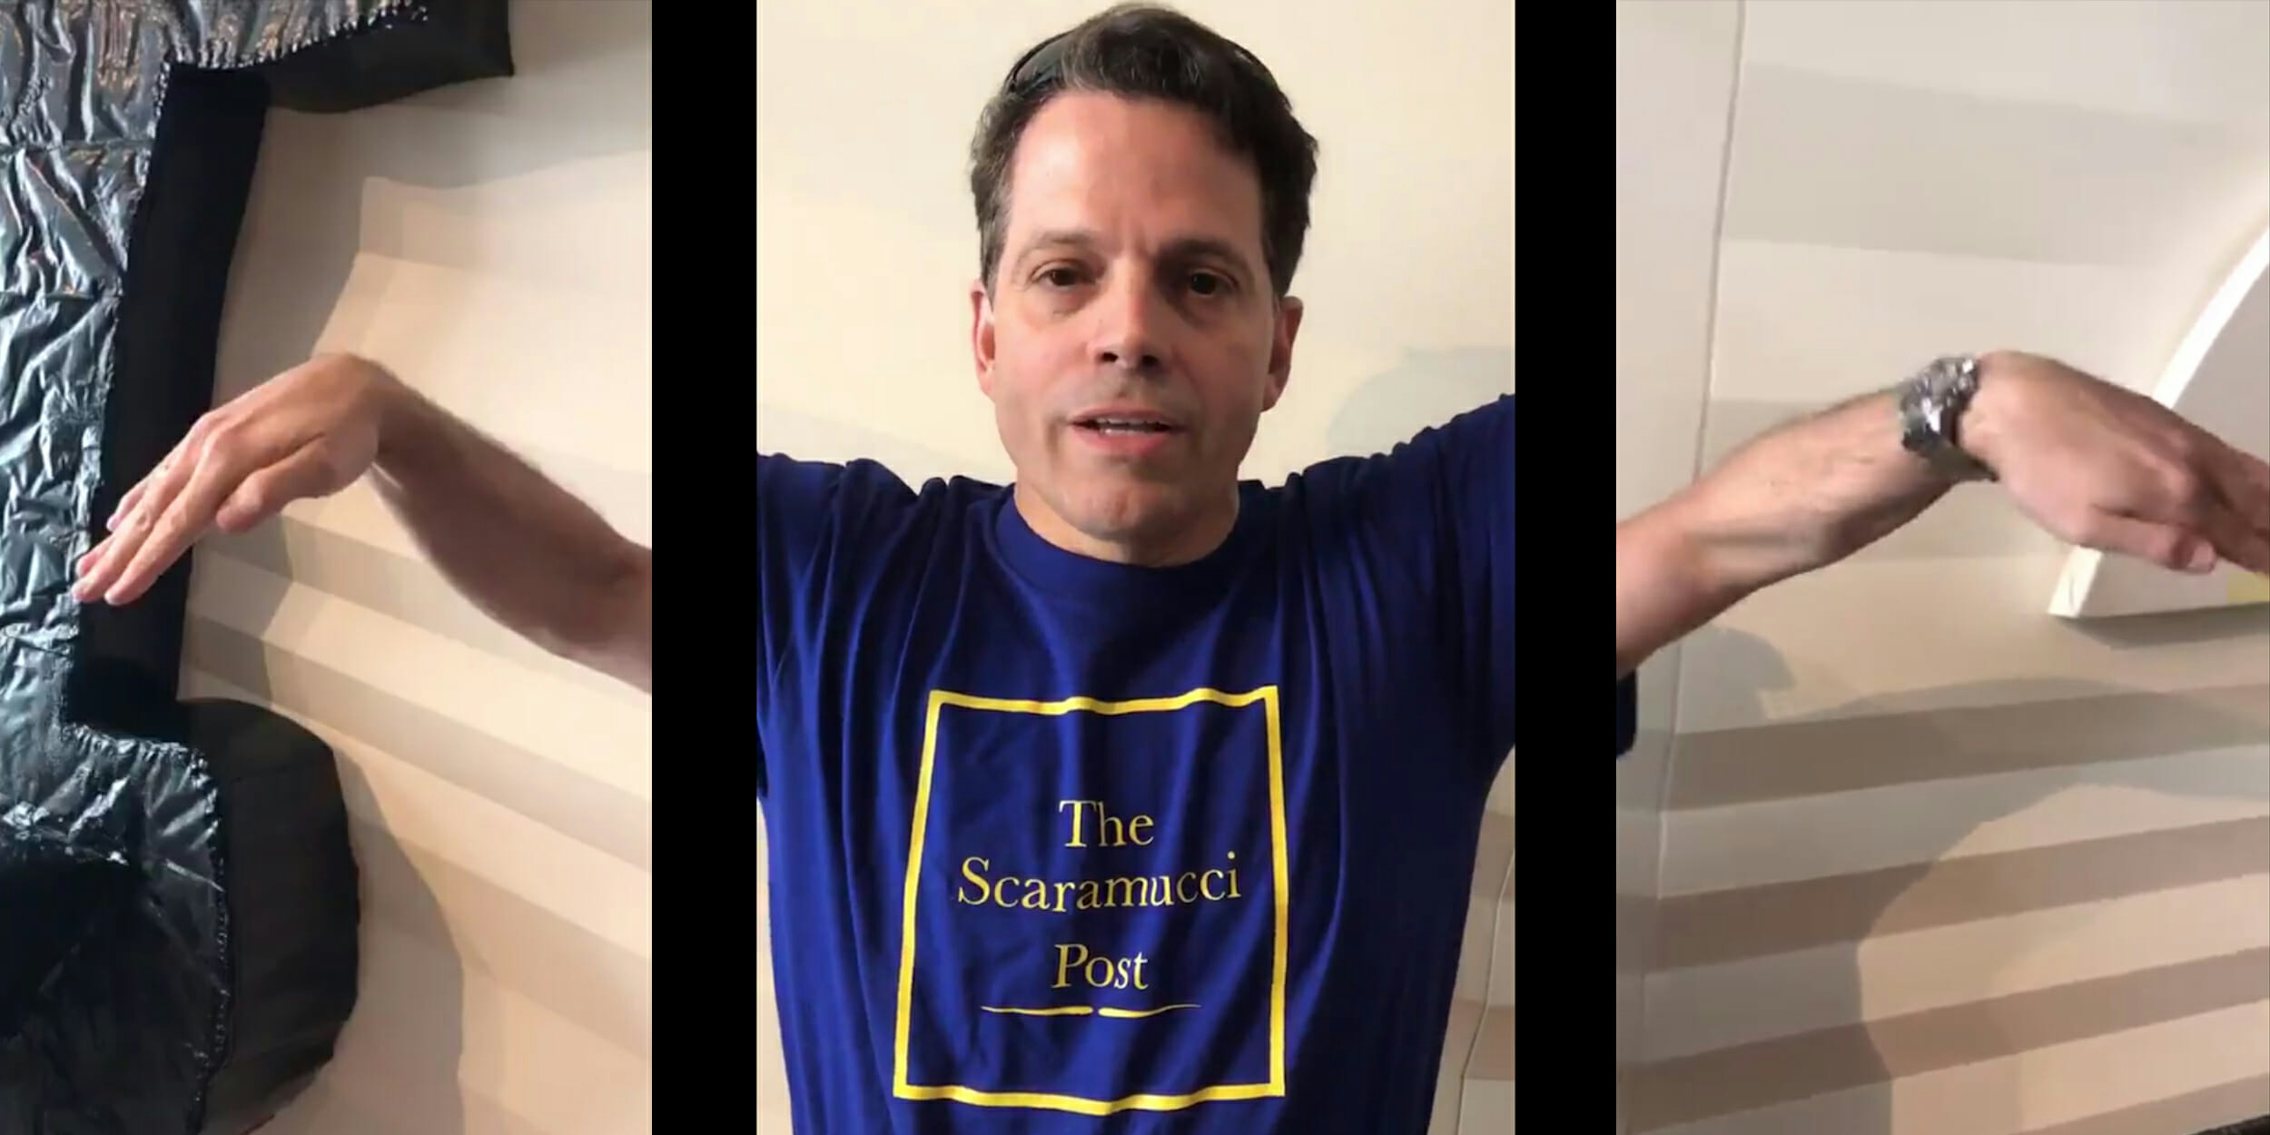 Anthony Scaramucci demonstrating the divide between the ideological left and right